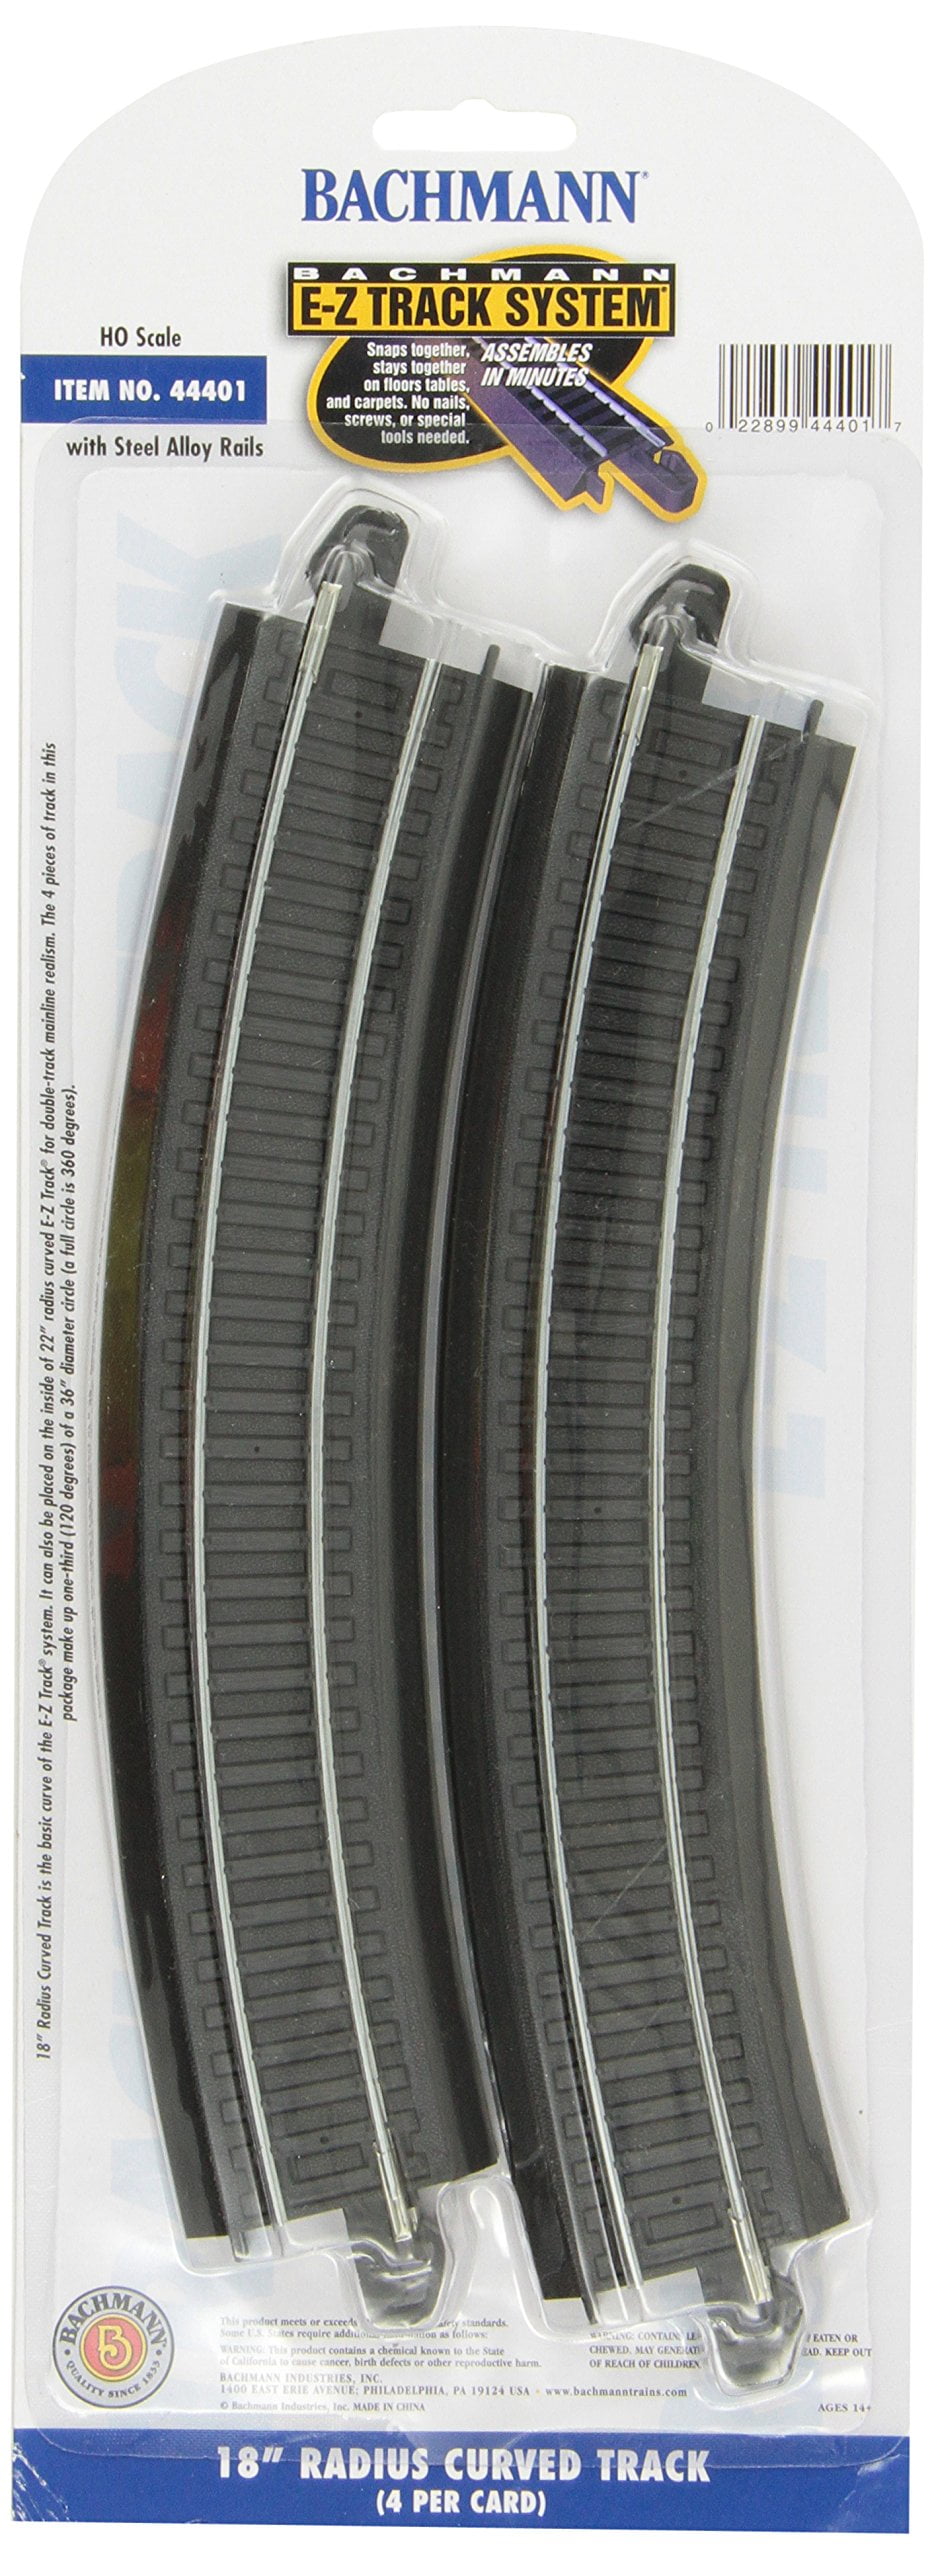 ONLY $15.00! TRU-TRACK 18"RADIUS CURVES HO SCALE NICE LOT OF 14 TRU-SCALE 